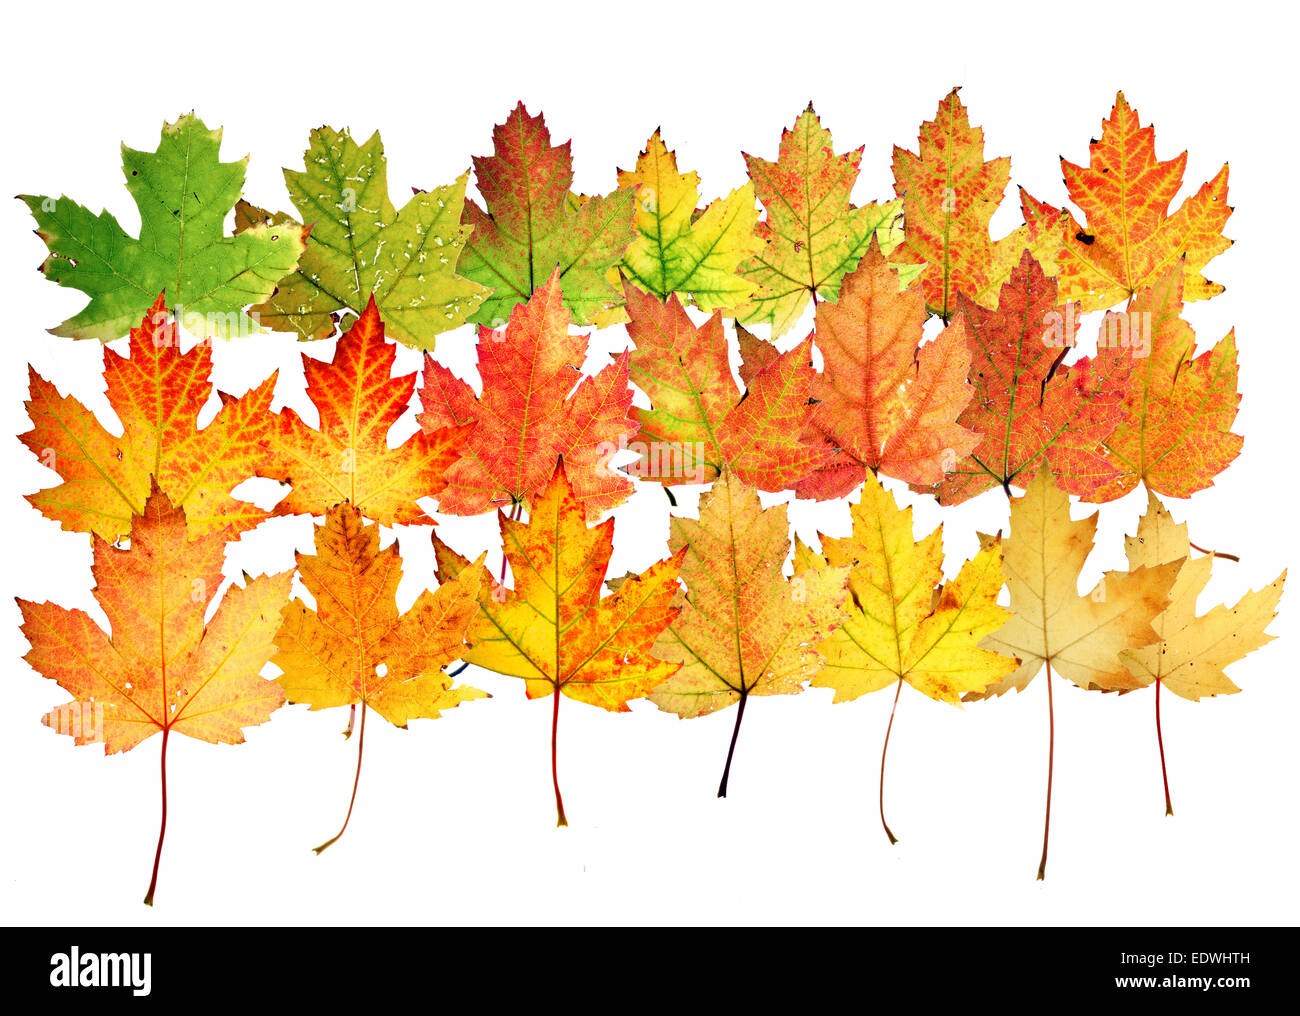 Autumn leaves, collage, (Acer saccharinum) maple leaves, Stock Photo